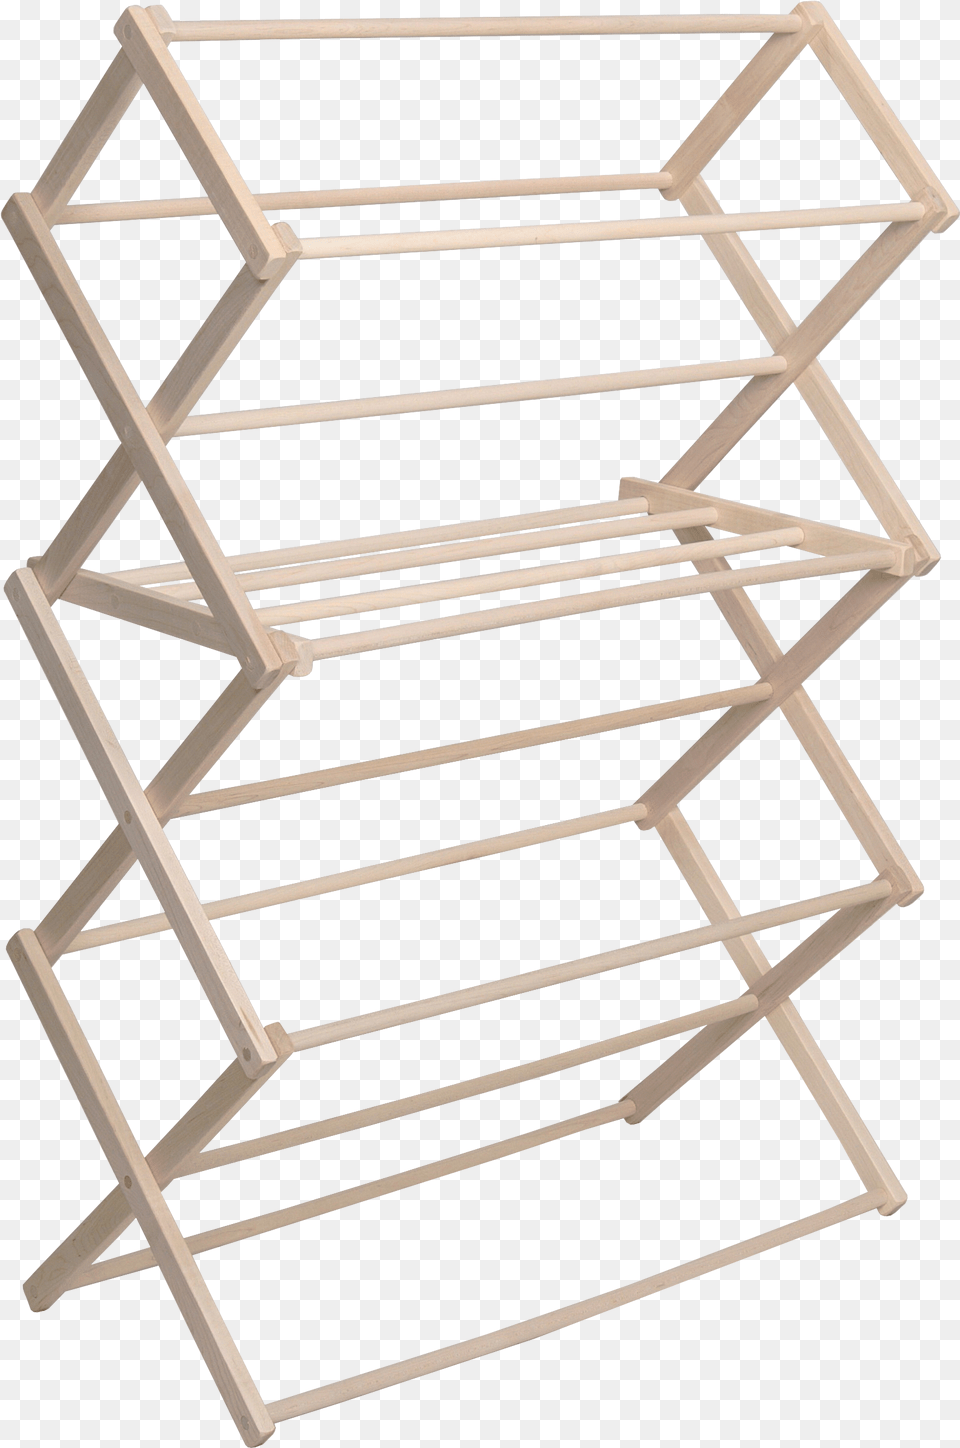 Pennsylvania Woodworks Large Wooden Clothes Drying Wooden Clothes Horse, Drying Rack, Crib, Furniture, Infant Bed Free Png